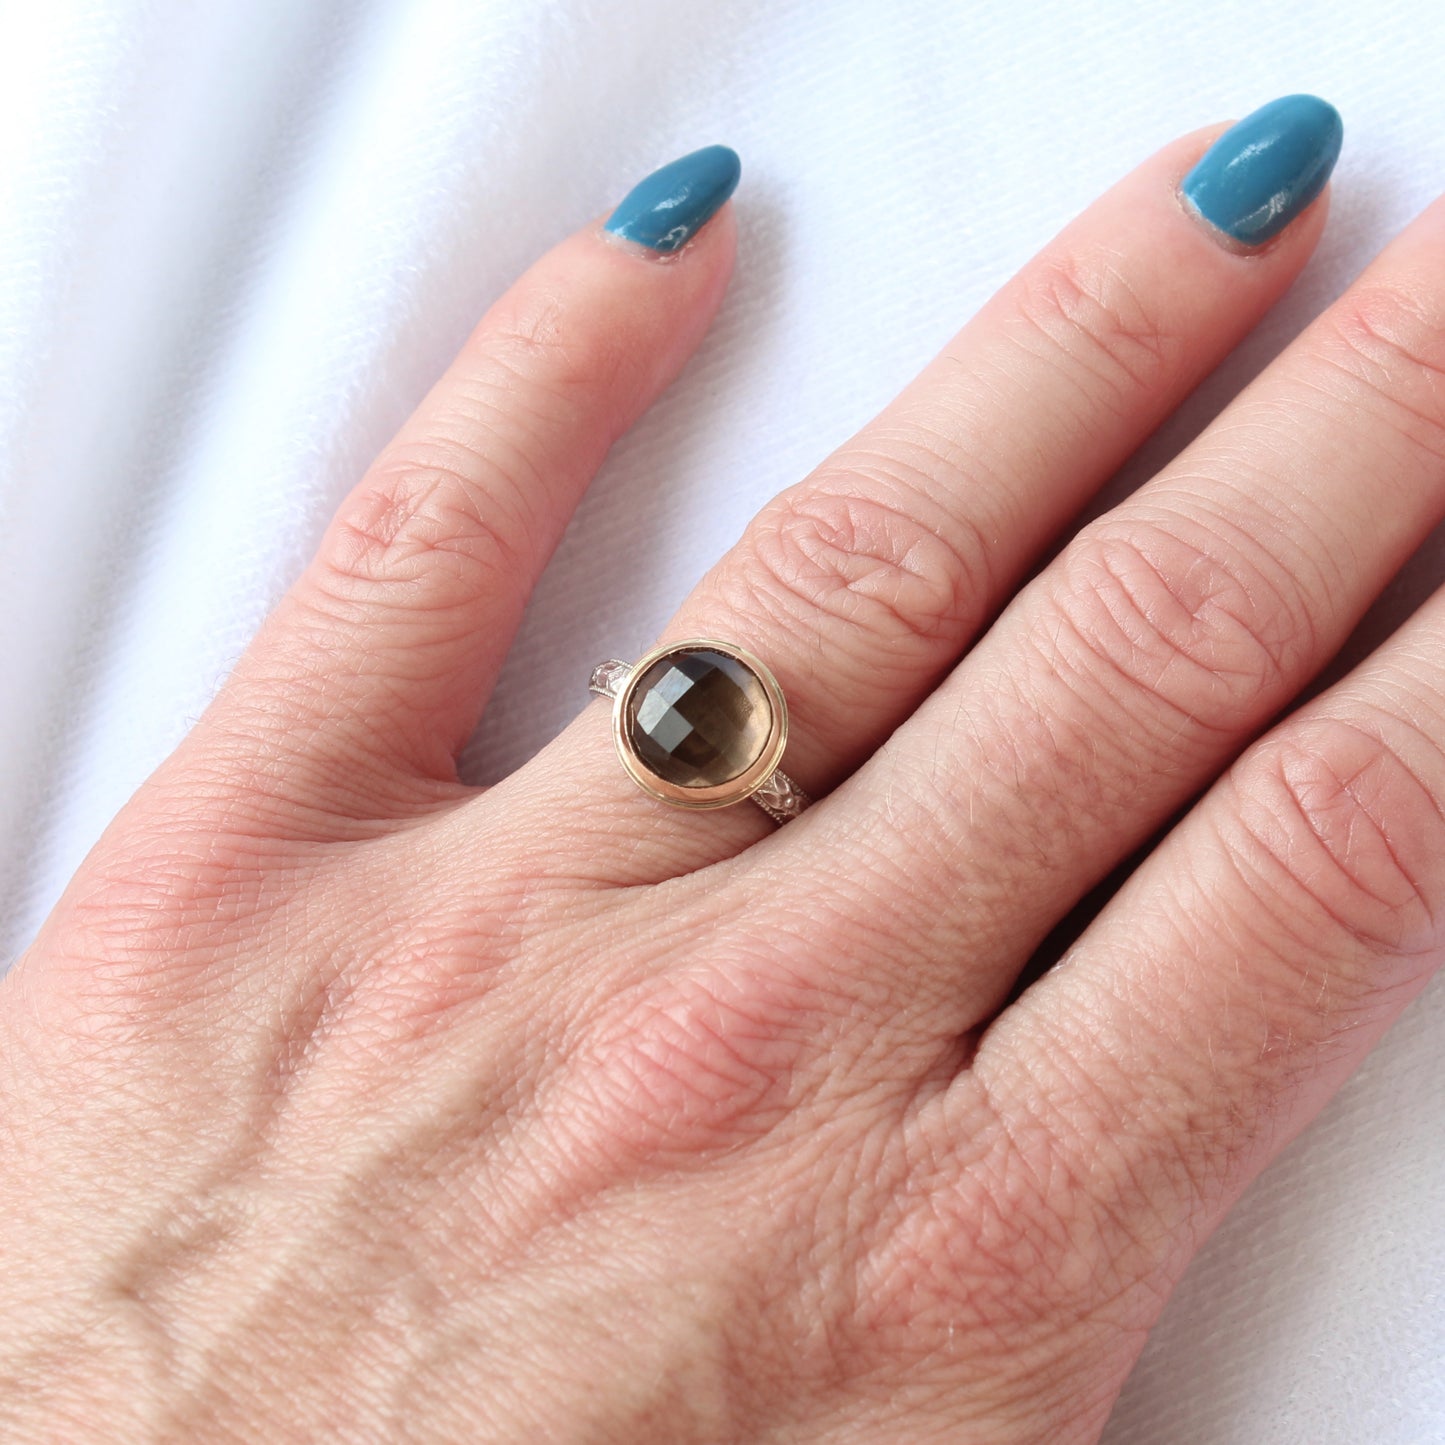 Smoky Quartz Brown Faceted Gemstone set in 14k Gold Bezel with a Patterned Sterling Silver Band